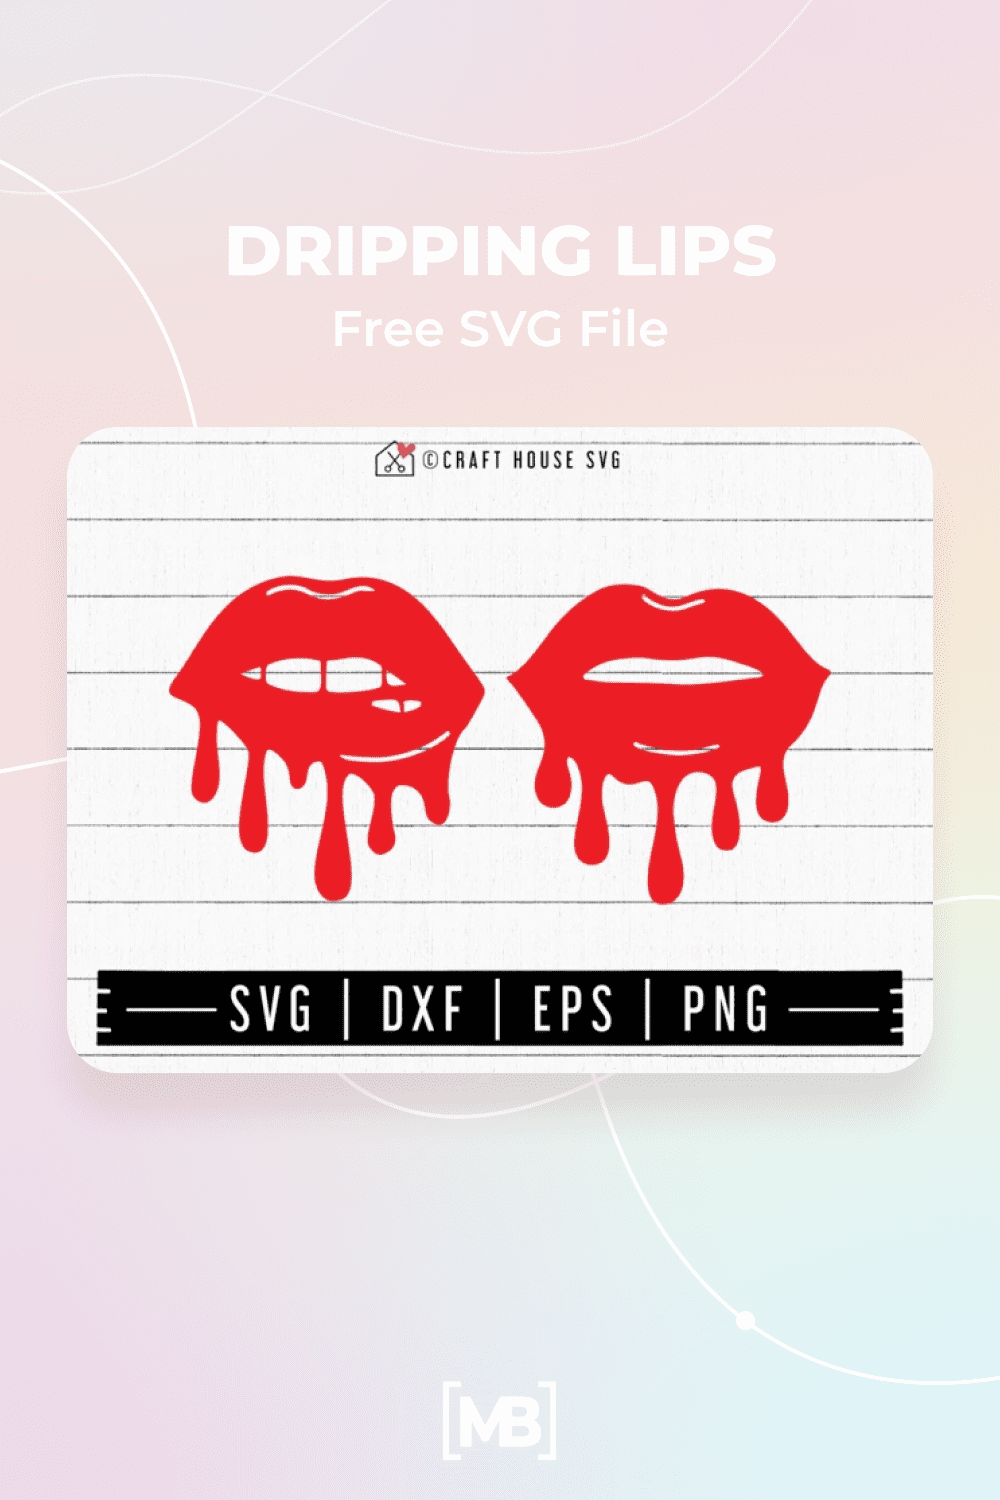 FREE DRIPPING LIPS SVG File.